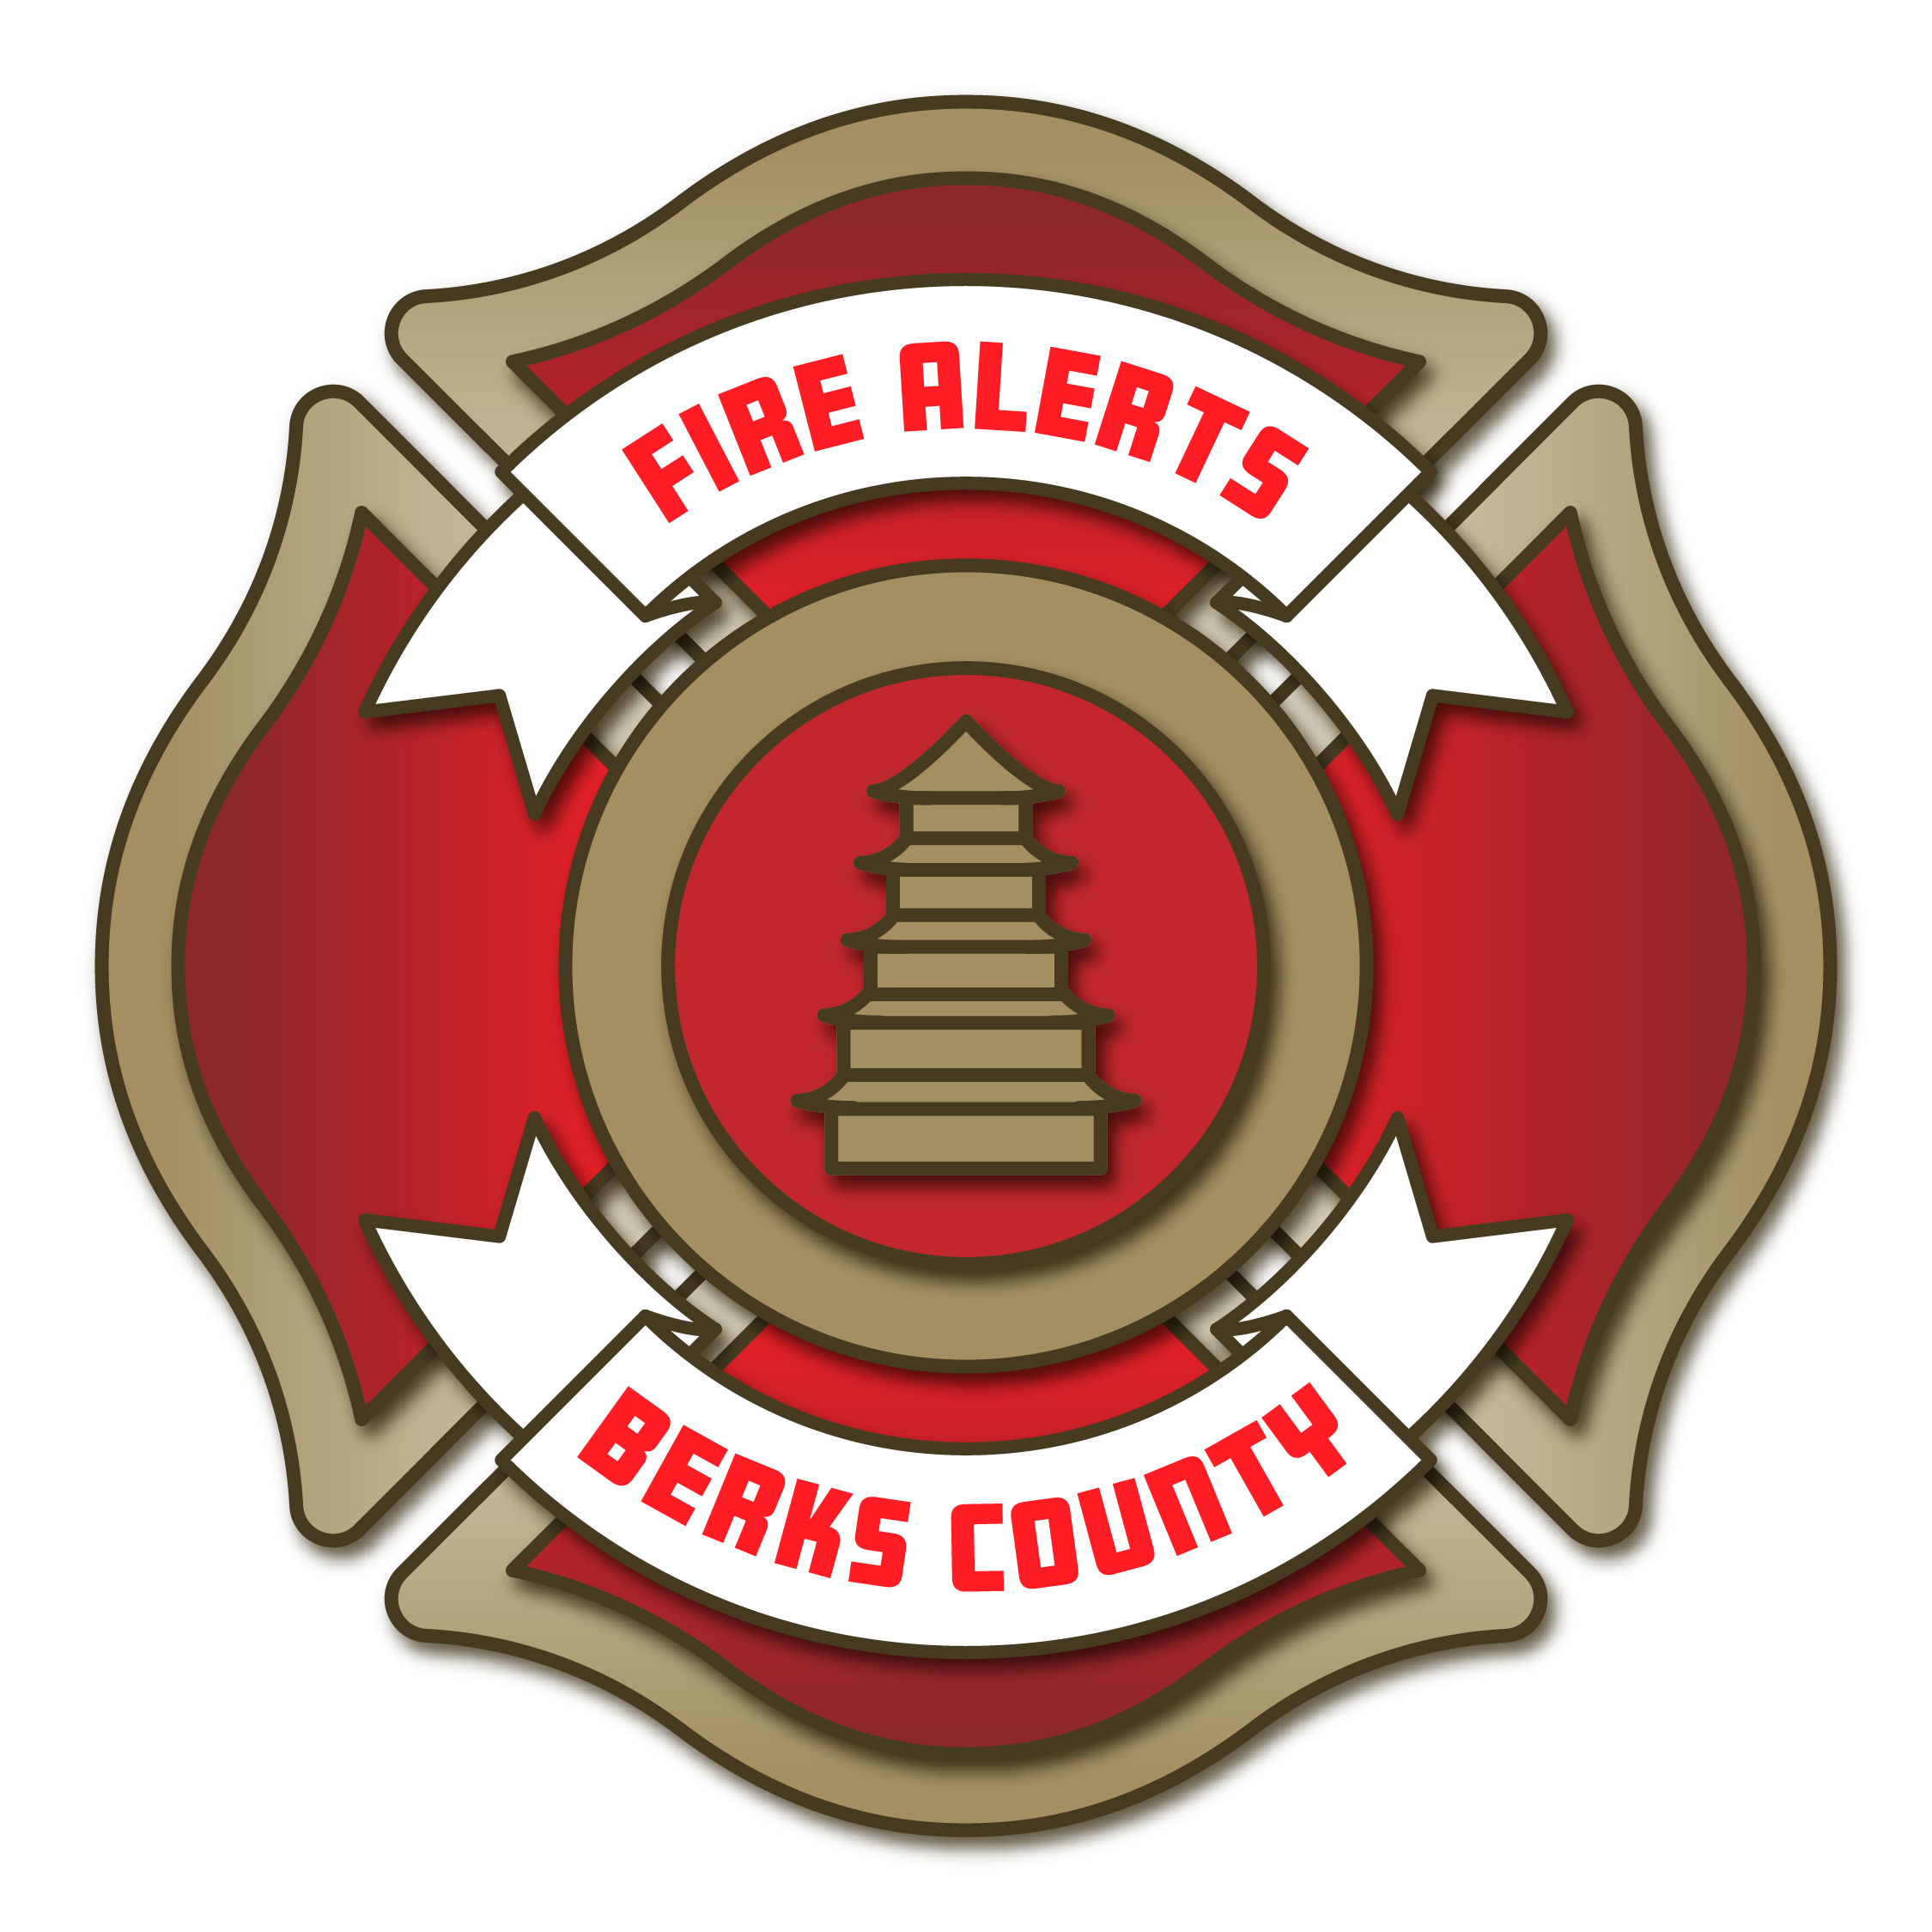 Fire Alerts of Berks County